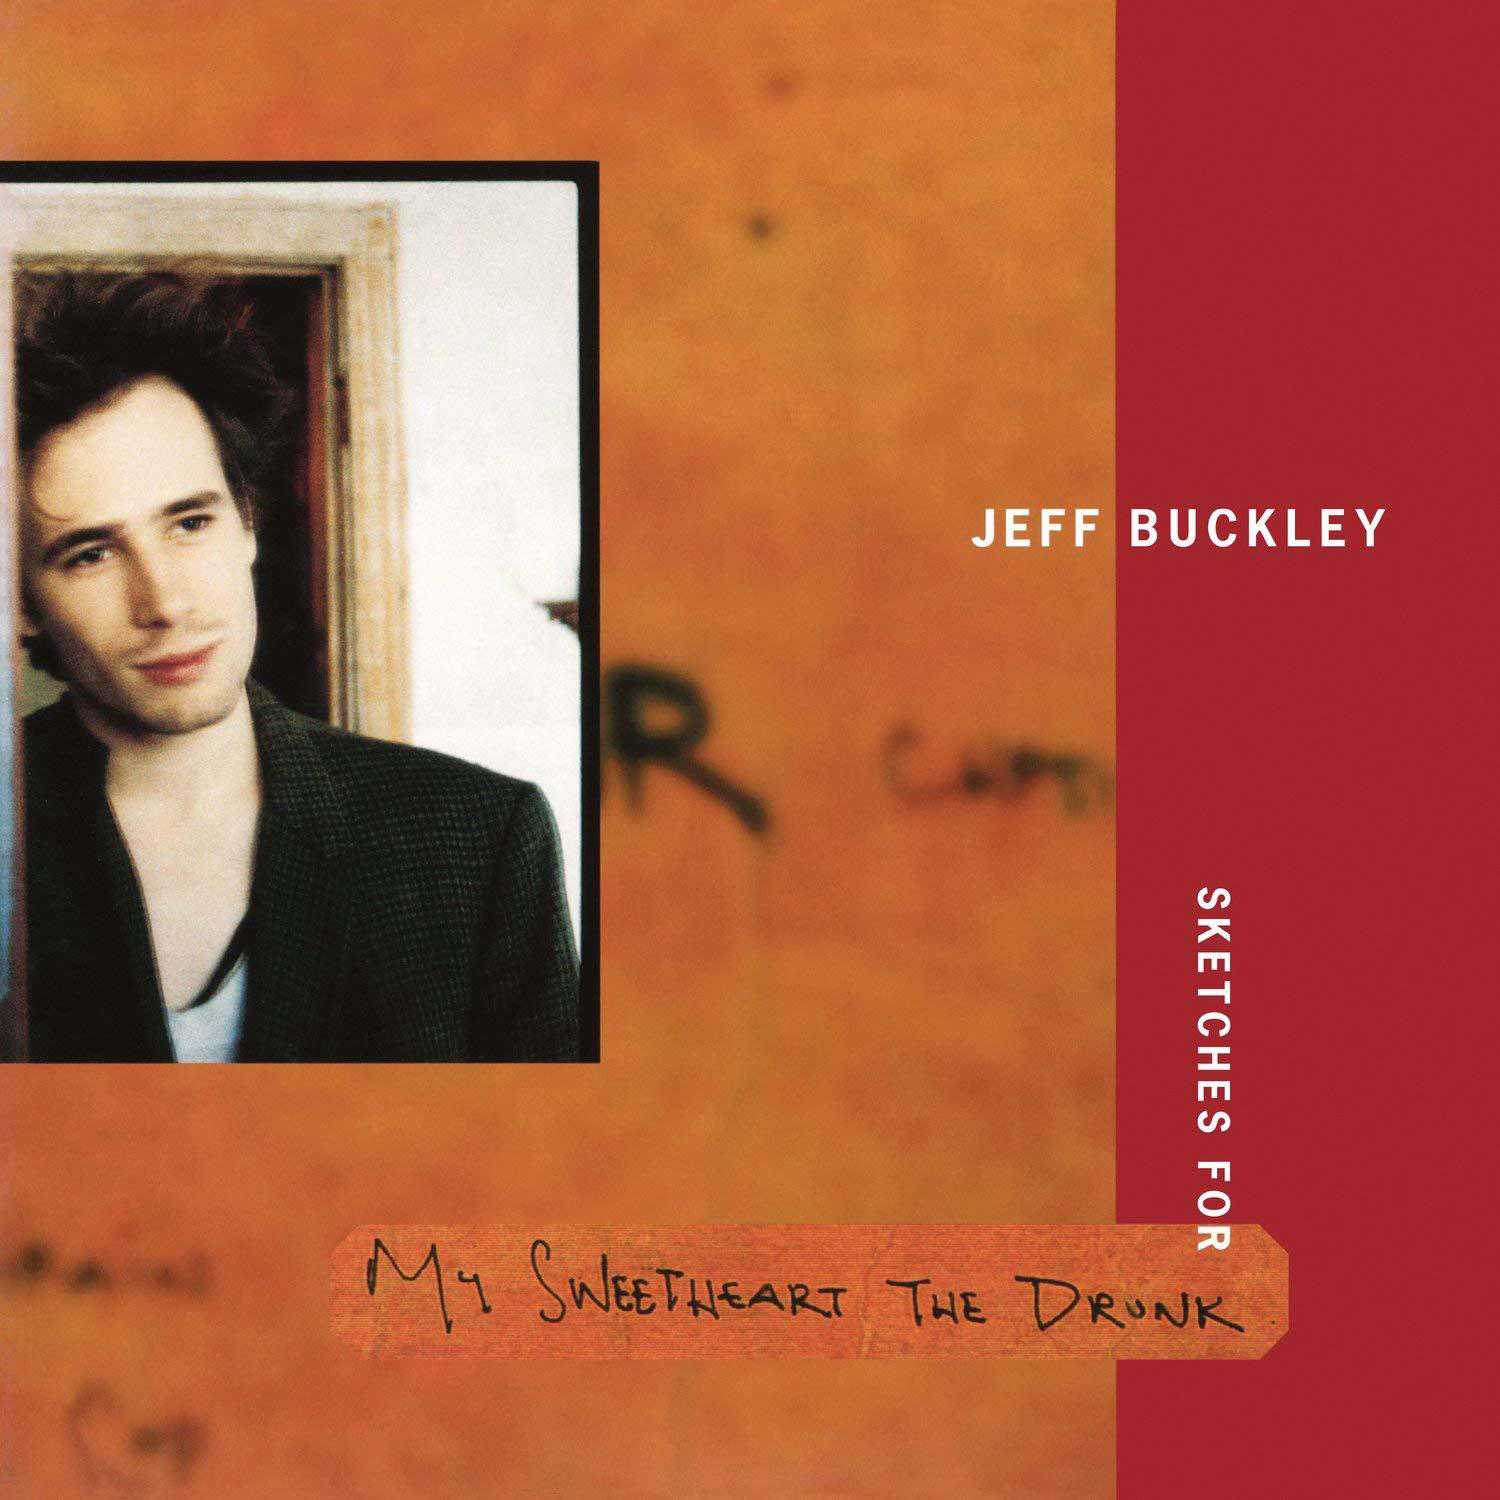 for (Vinyl) My - - The Buckley Sketches Drunk Sweetheart Jeff